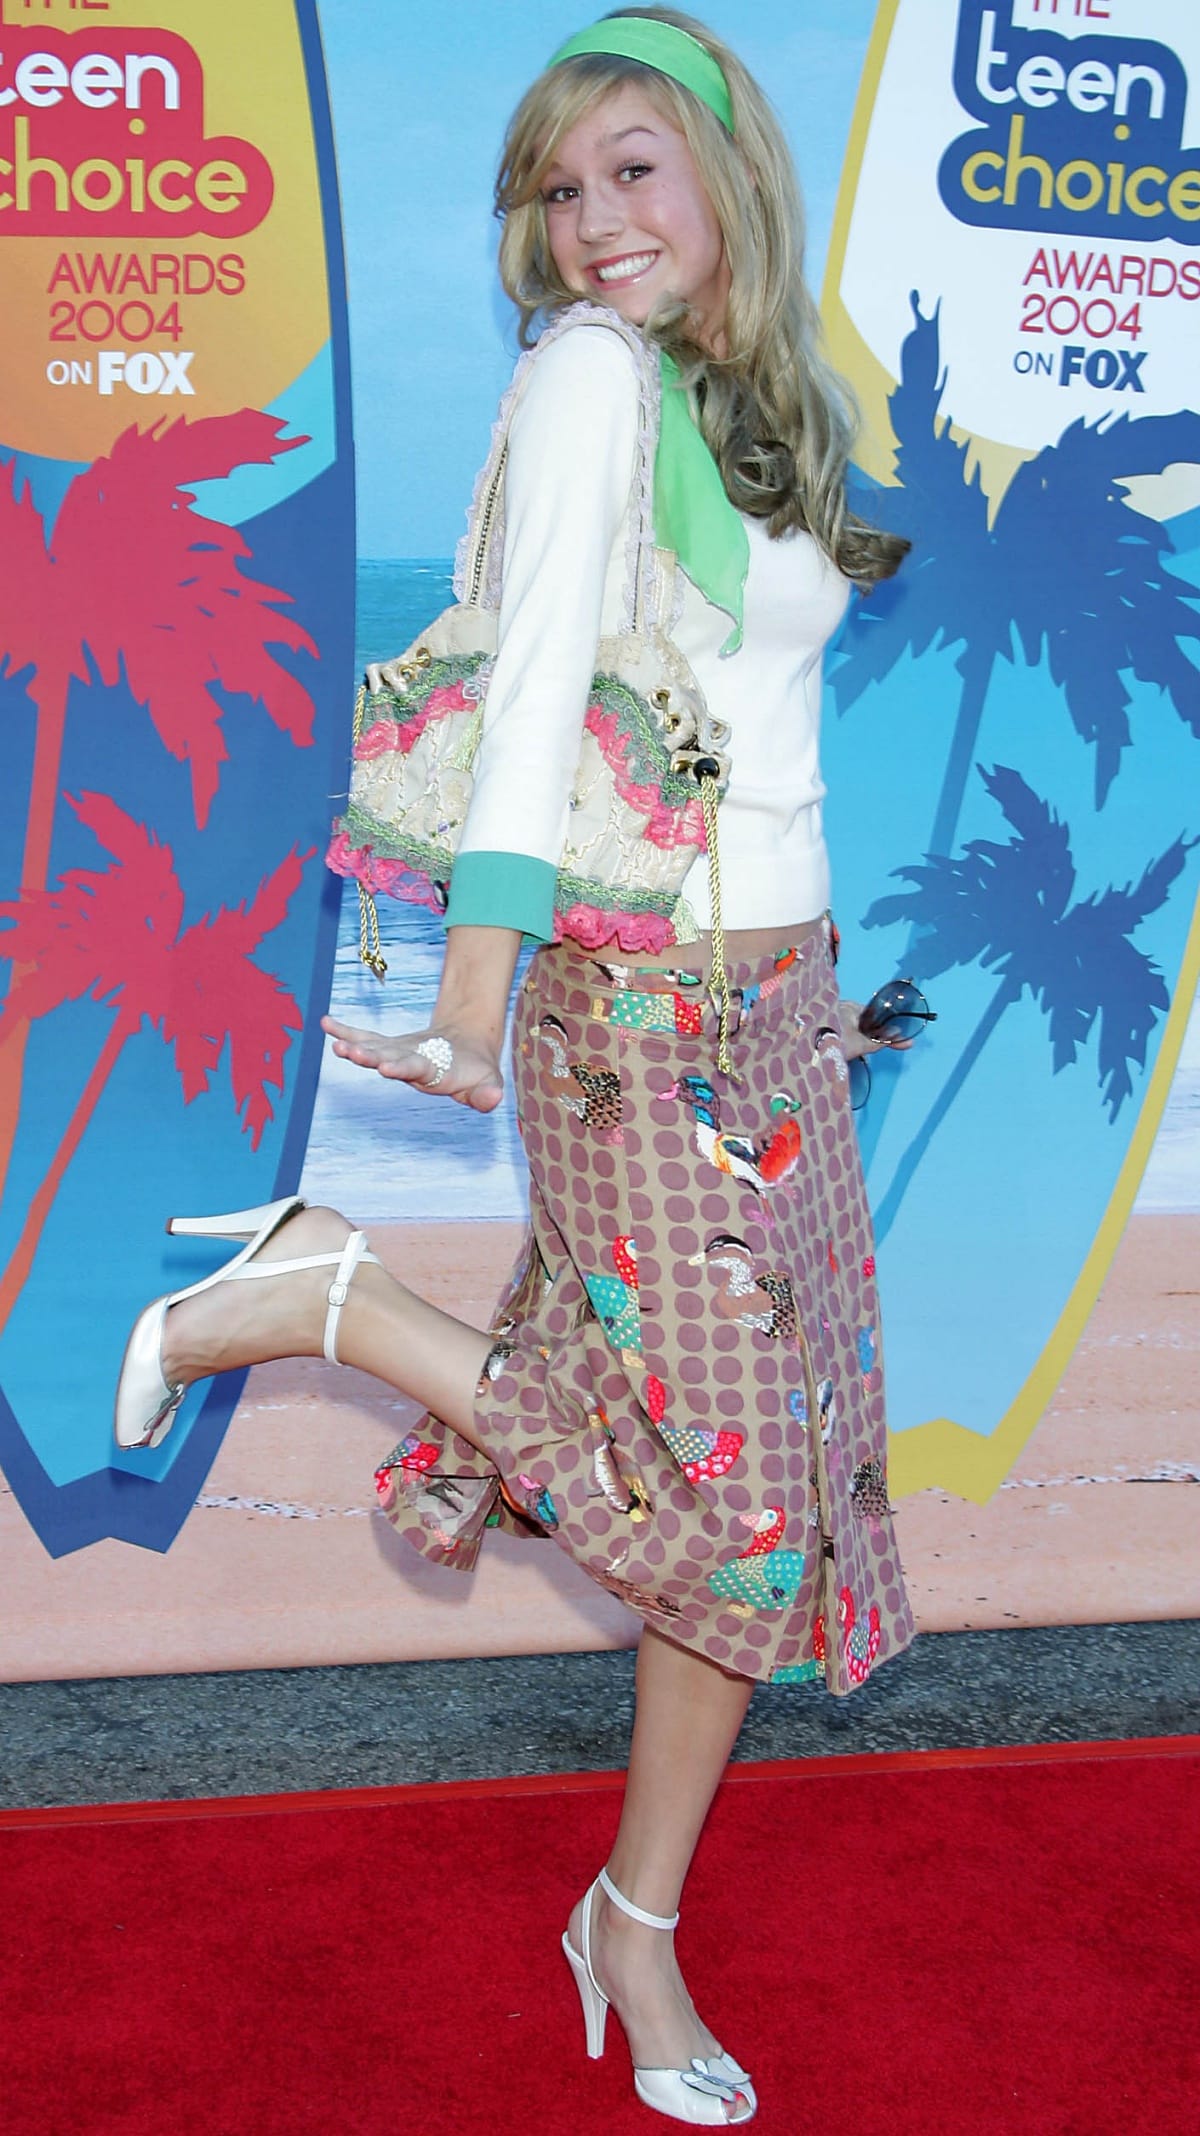 Brie Larson bringing her youthful charm to the 2004 Teen Choice Awards